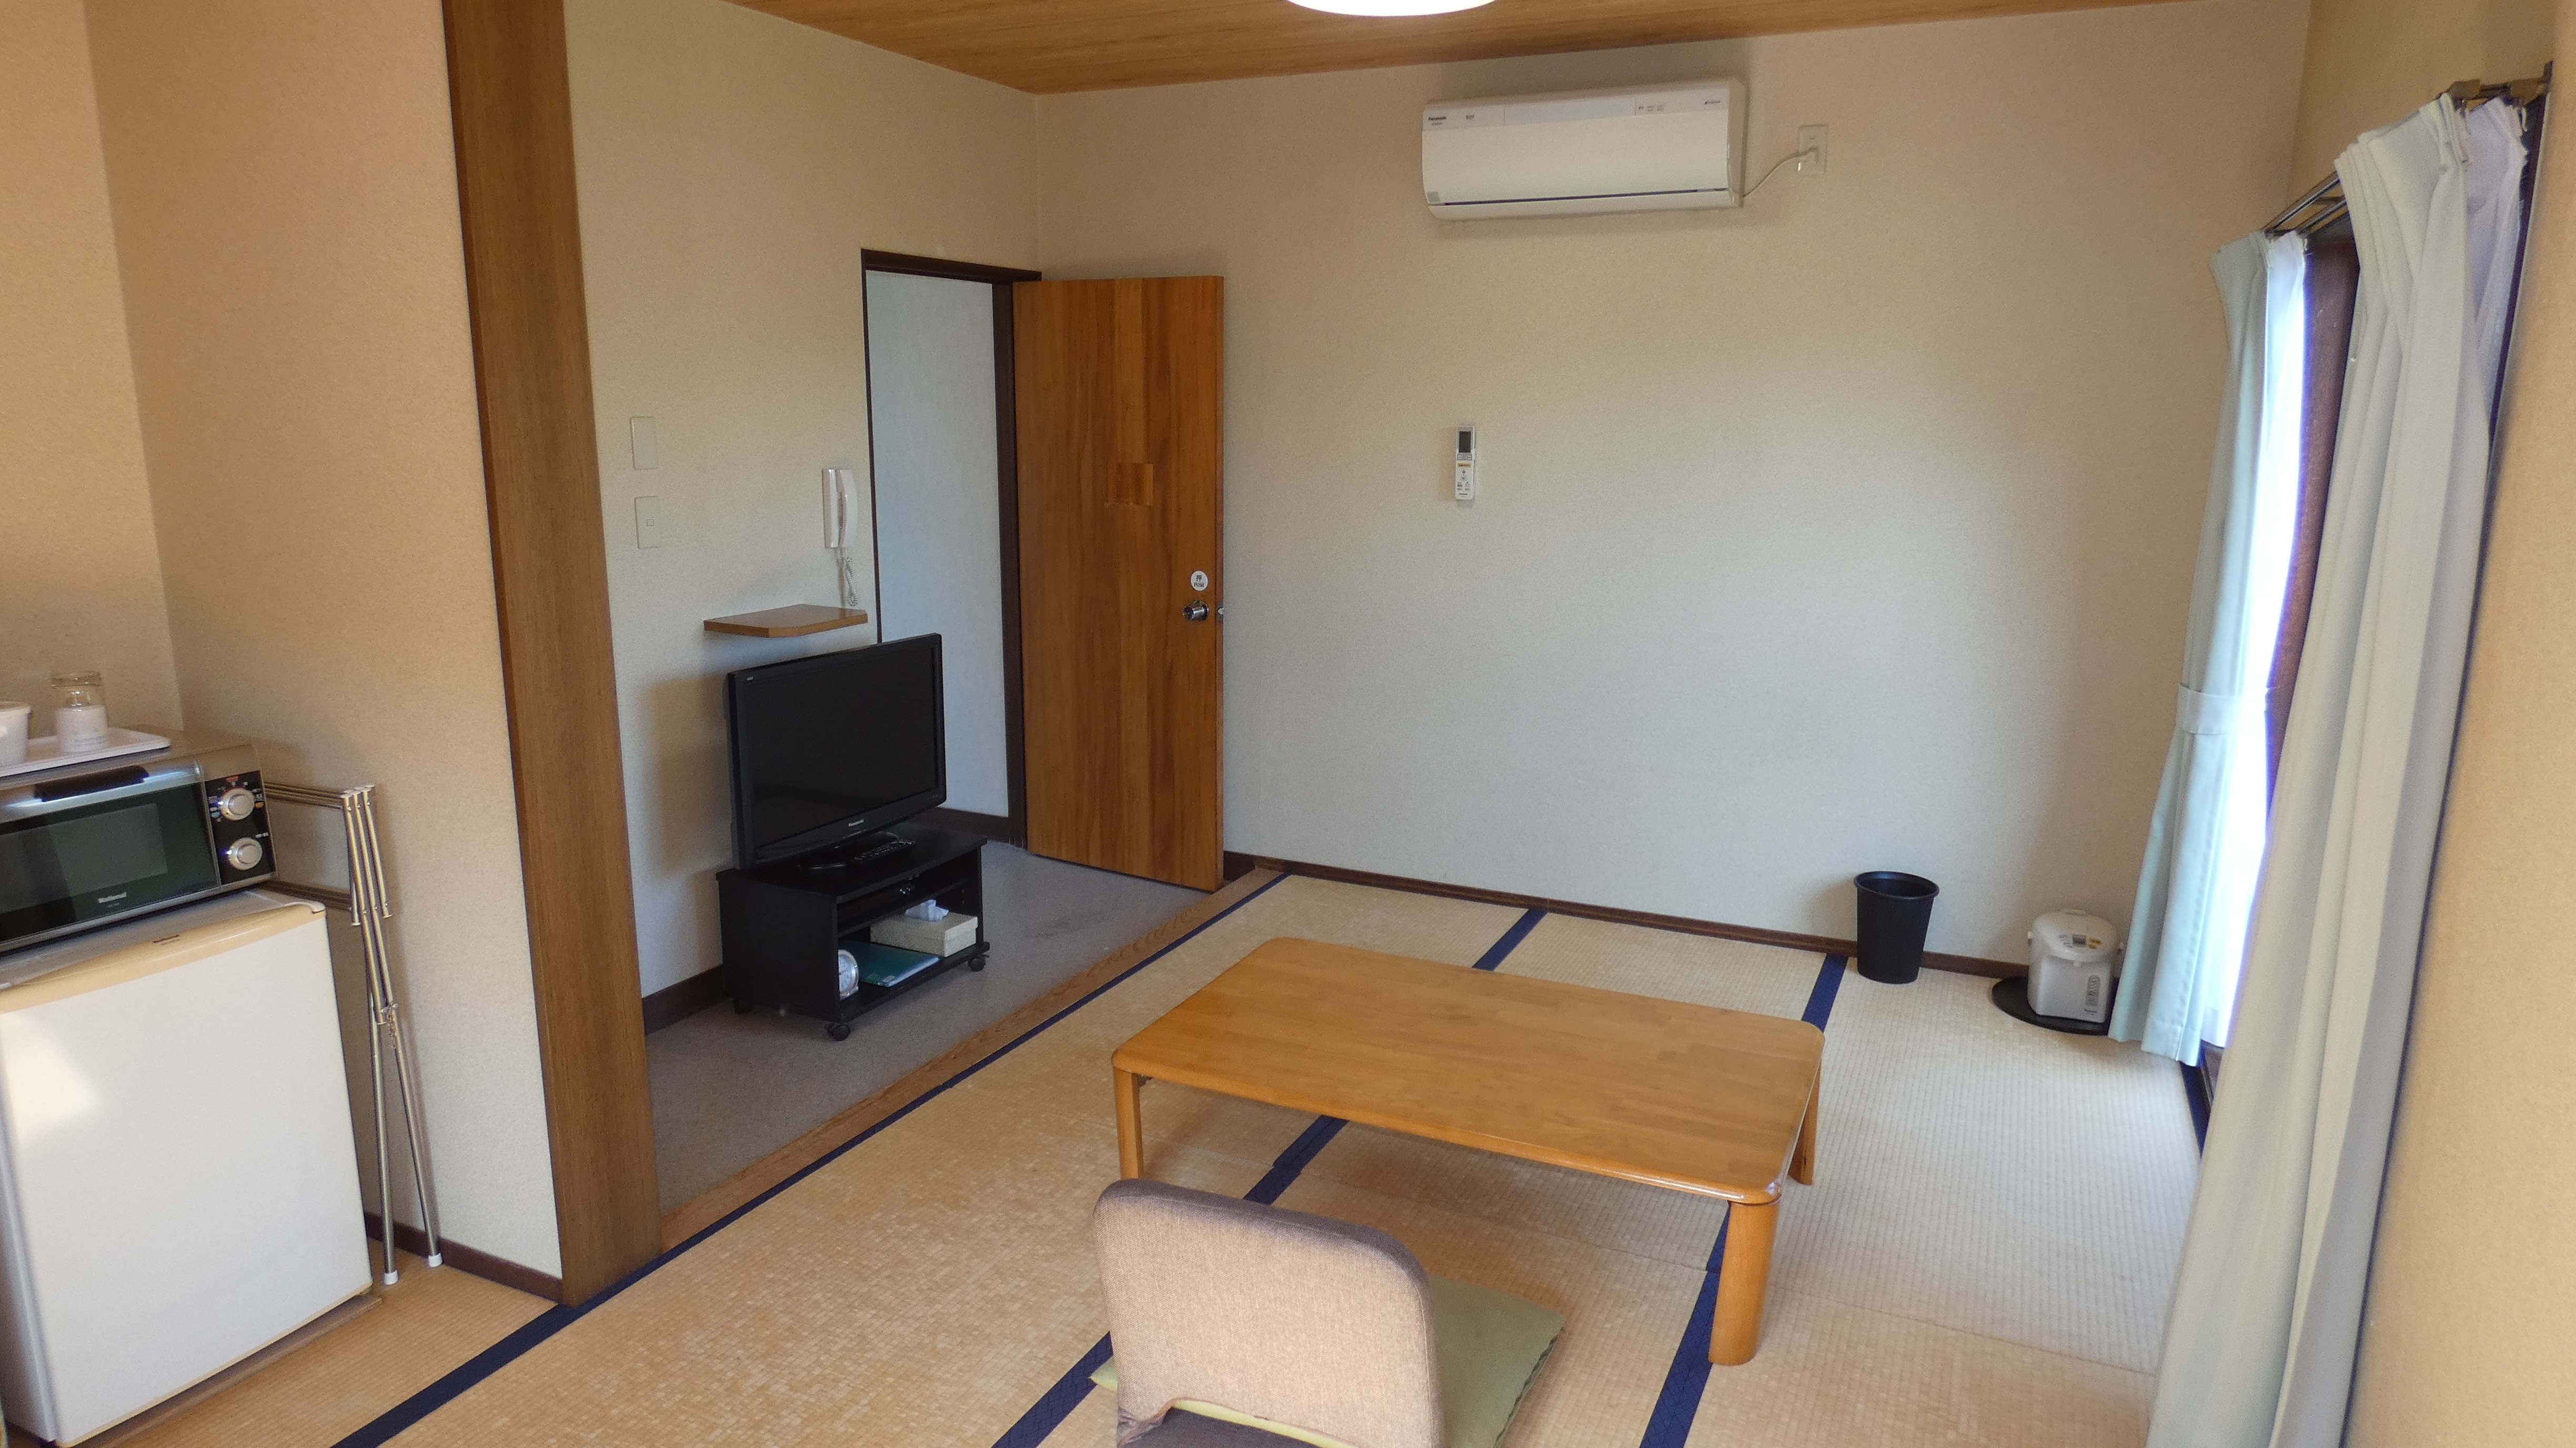 Privately reserved [Japanese-style room 12 tatami mats] Up to 5 people OK Table space